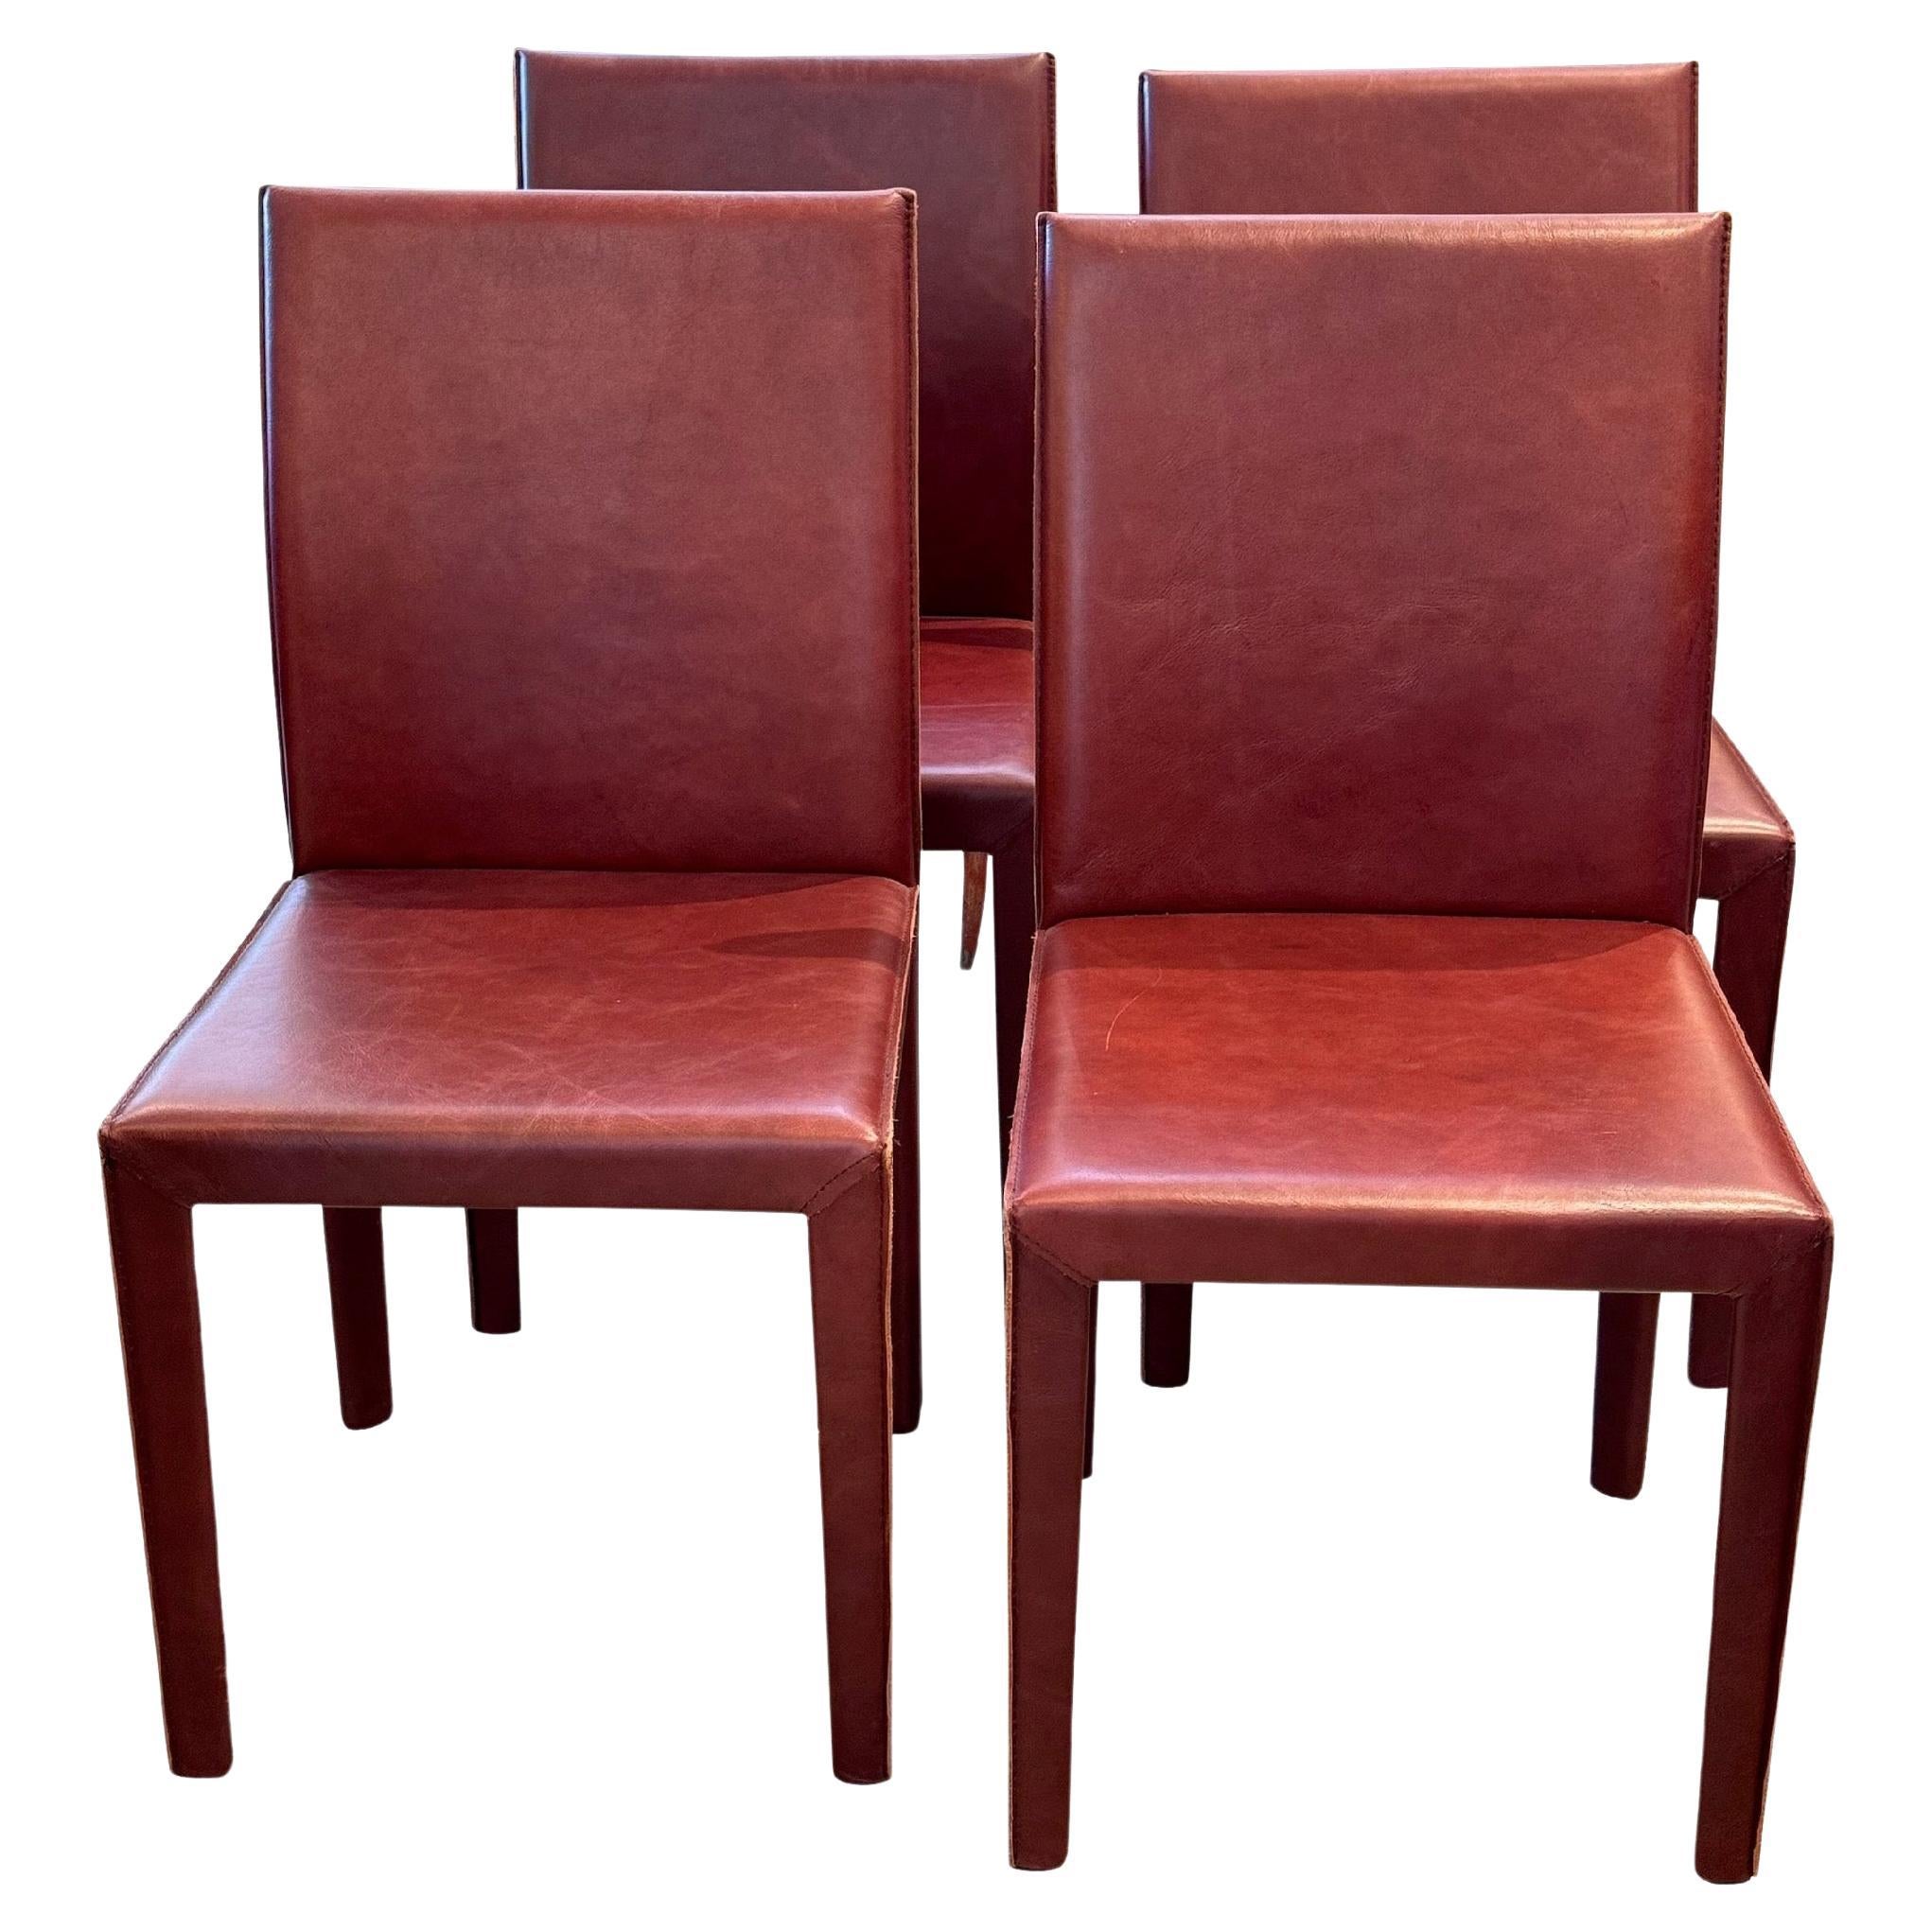 Mid 20th Century Set of Four Mario Bellini Style Chairs